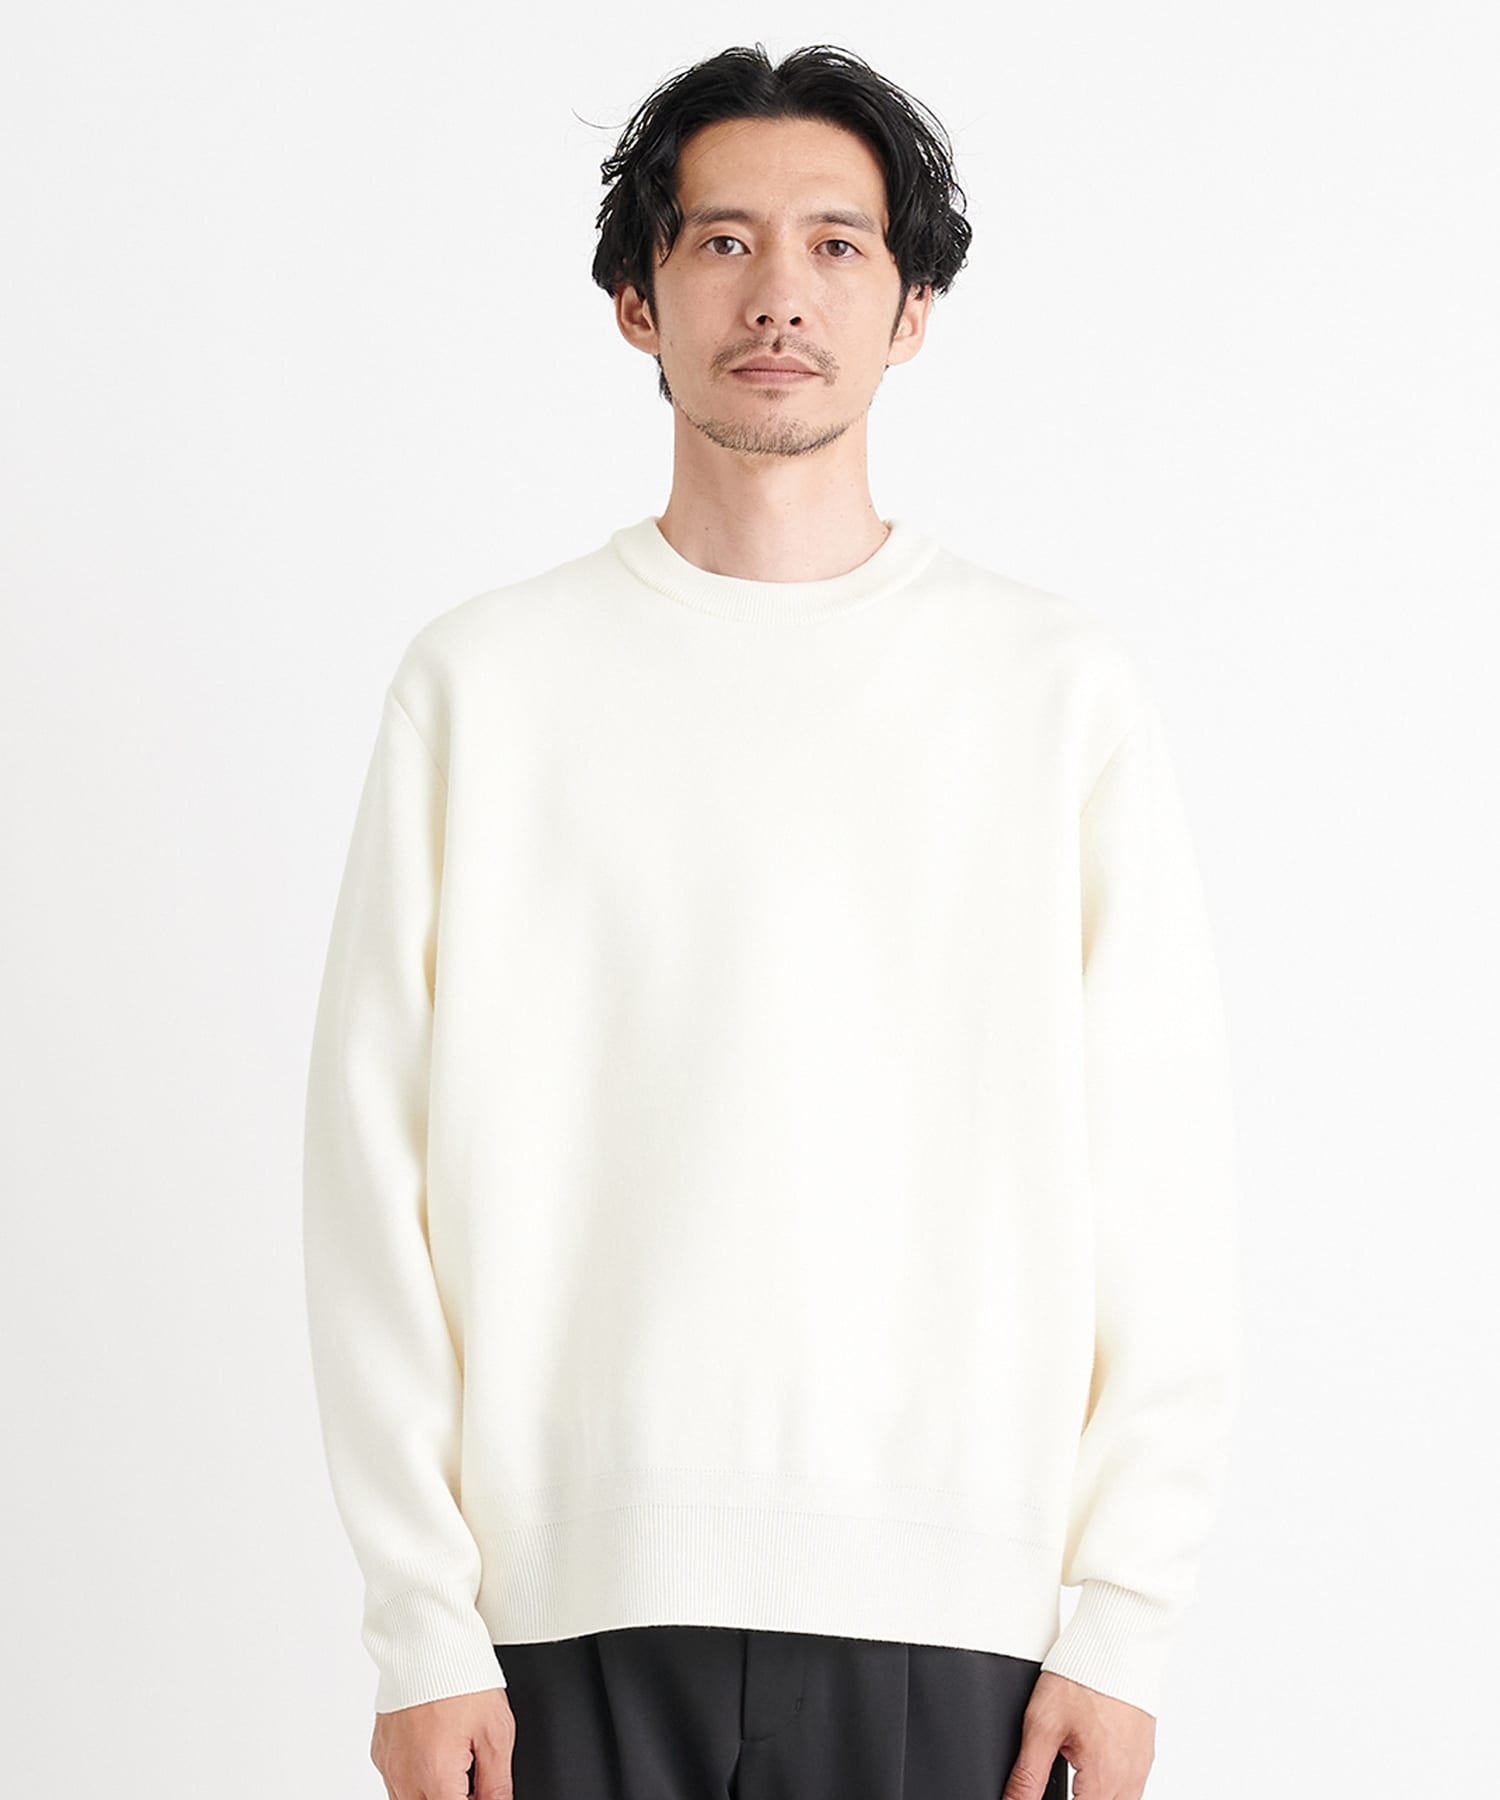 12G Ultimate Crew Neck Knit PO THE TOKYO